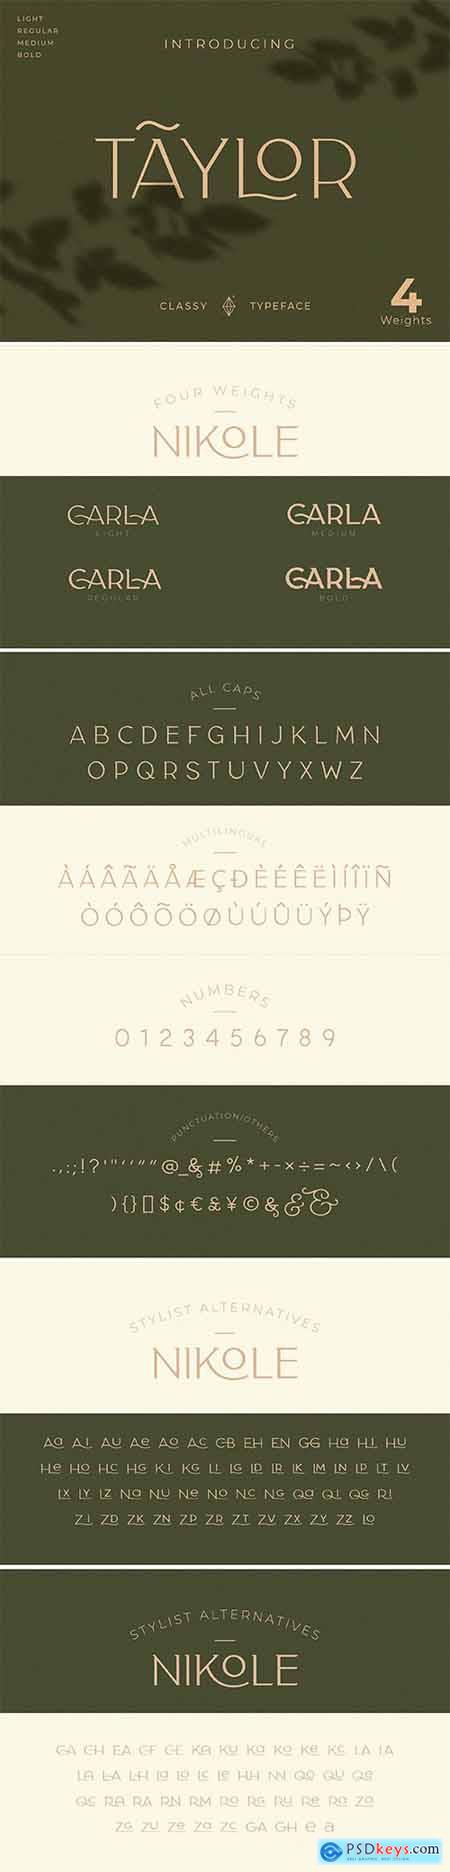 Classy Taylor Typeface